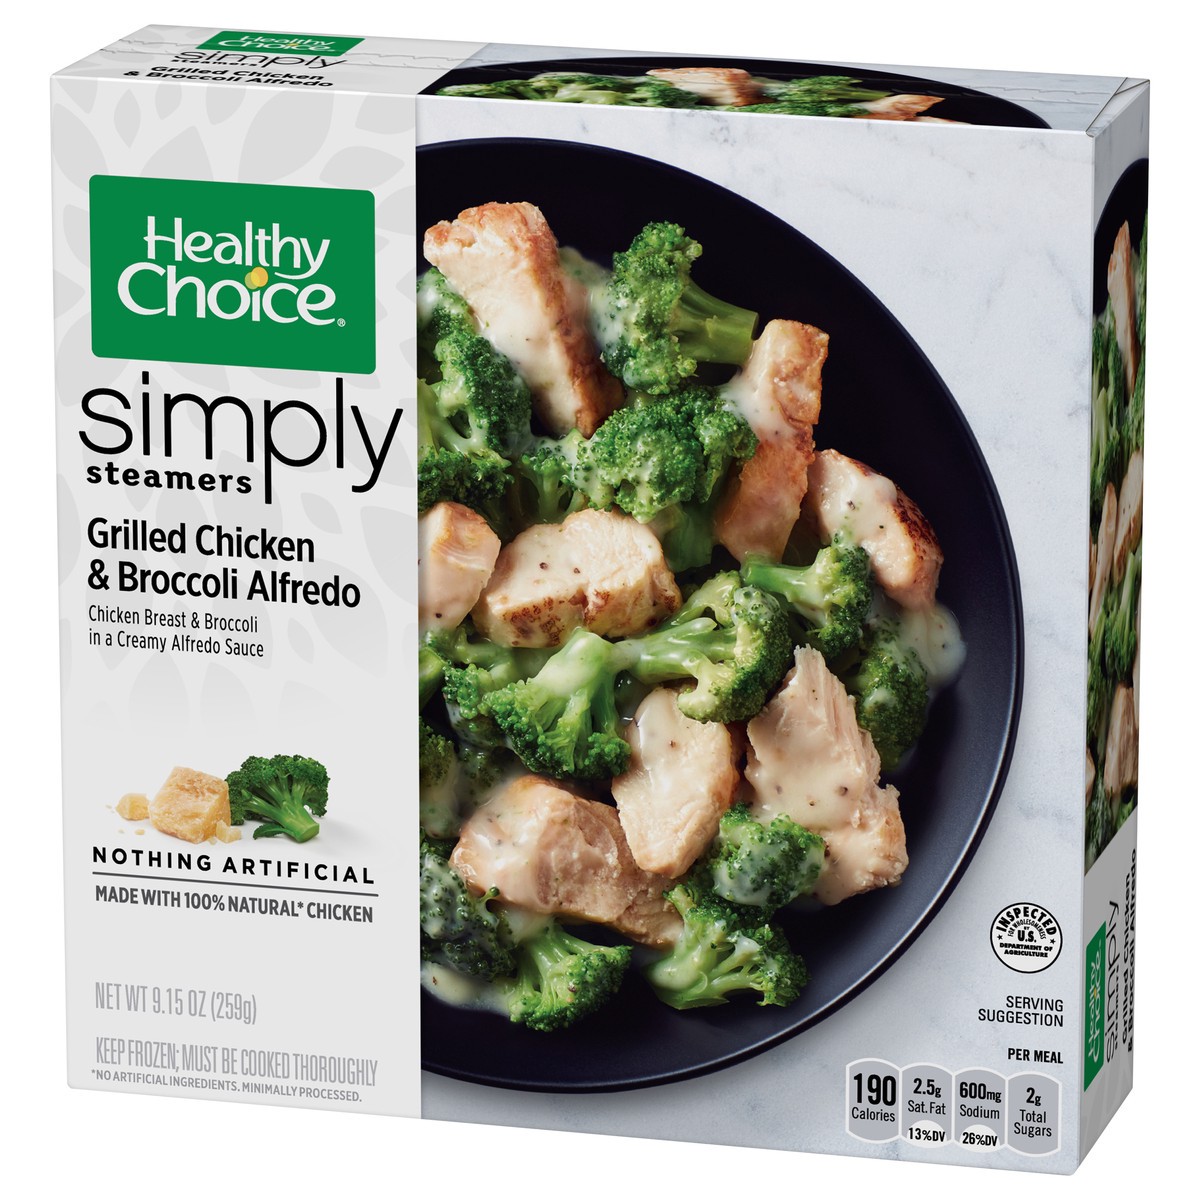 slide 6 of 12, Healthy Choice Simply Steamers Grilled Chicken & Broccoli Alfredo 9.15 oz, 9.15 oz